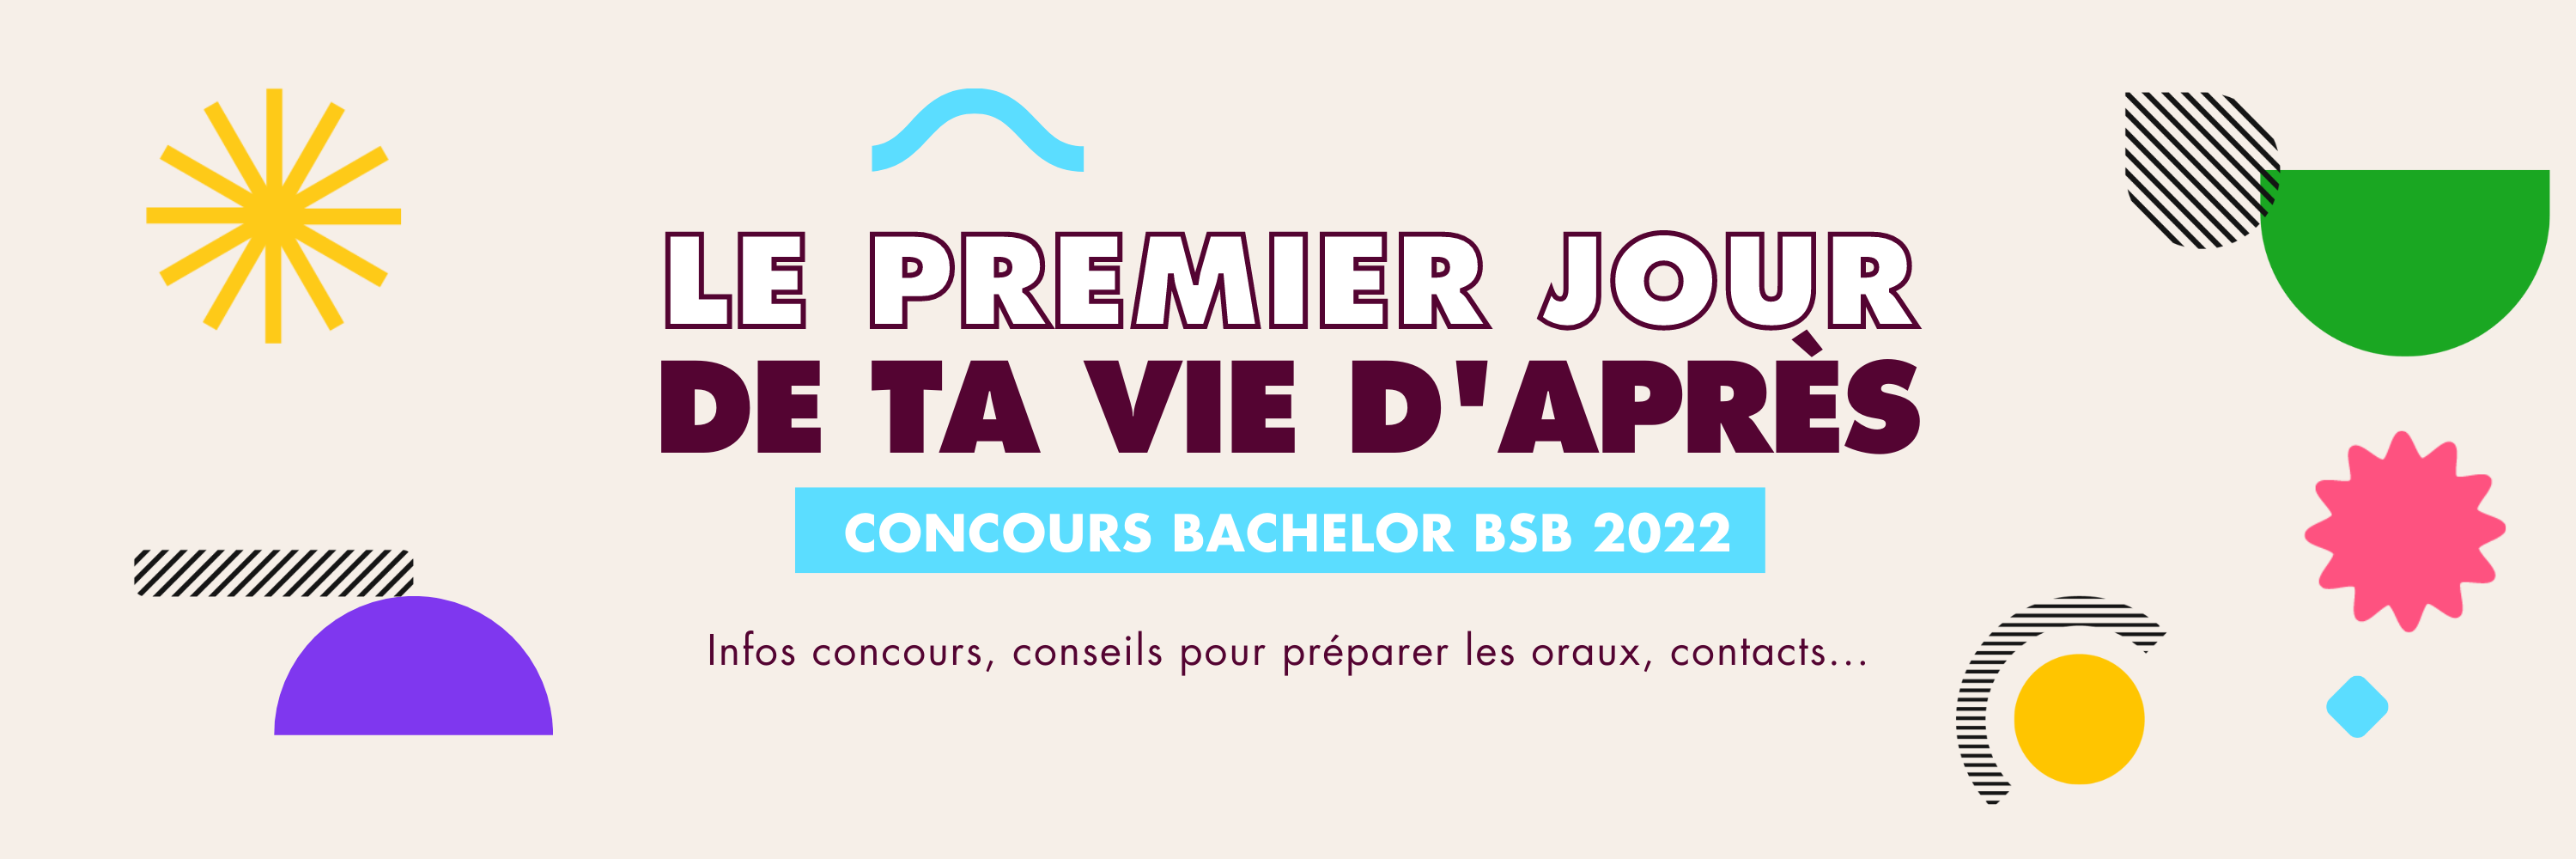 BSB Concours Bachelor 2022